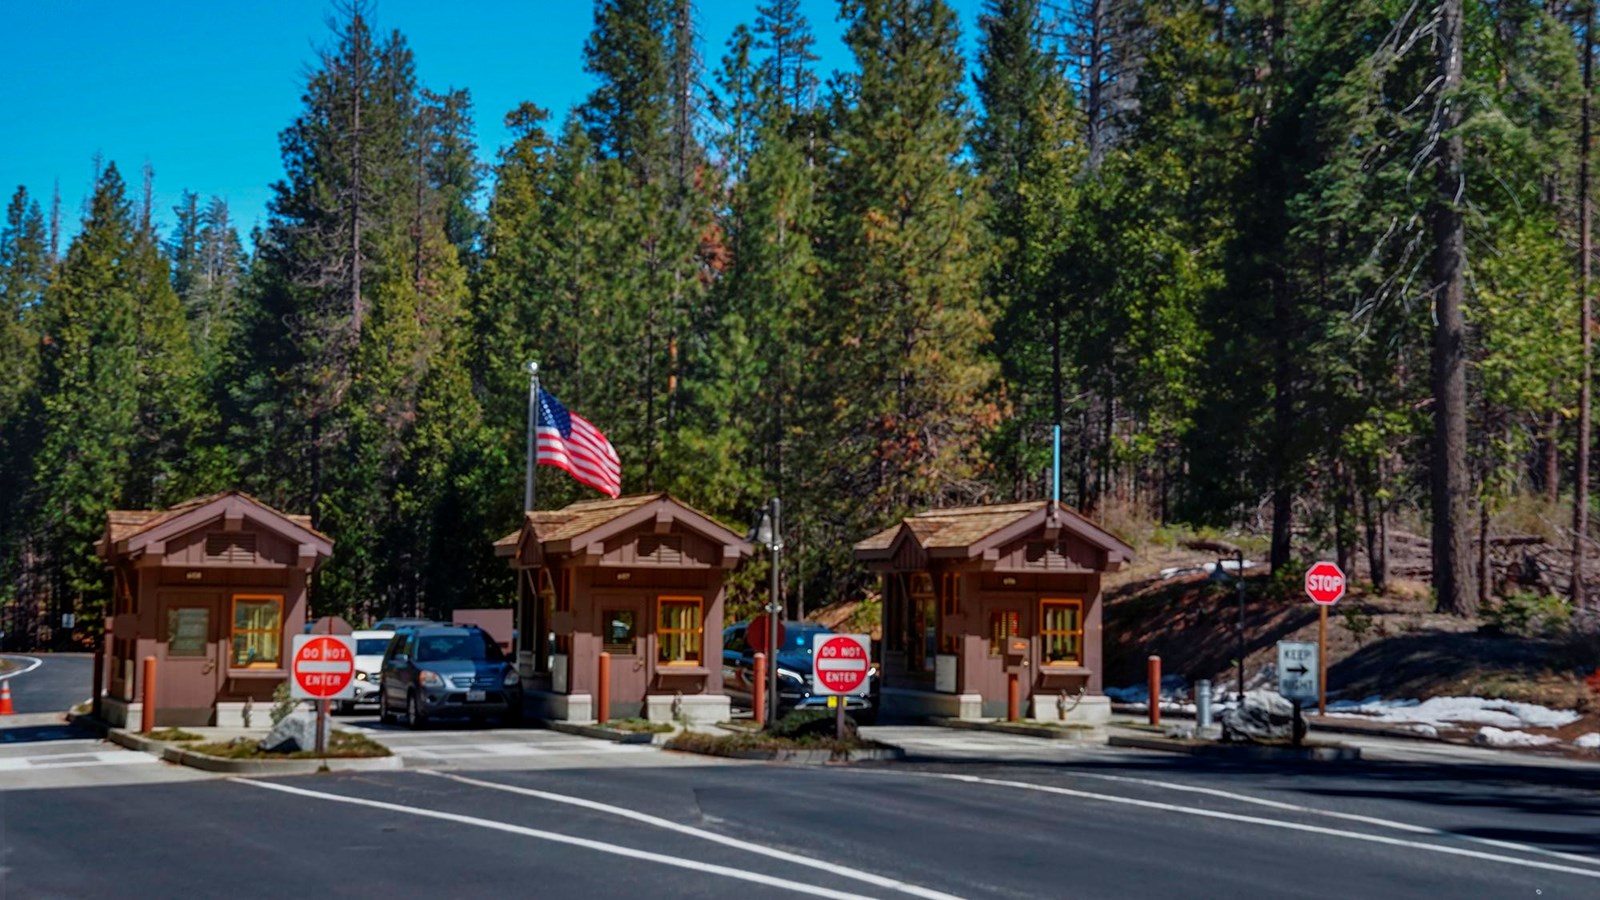 Three small wooden buildings at the entrance with the American flag on a pole